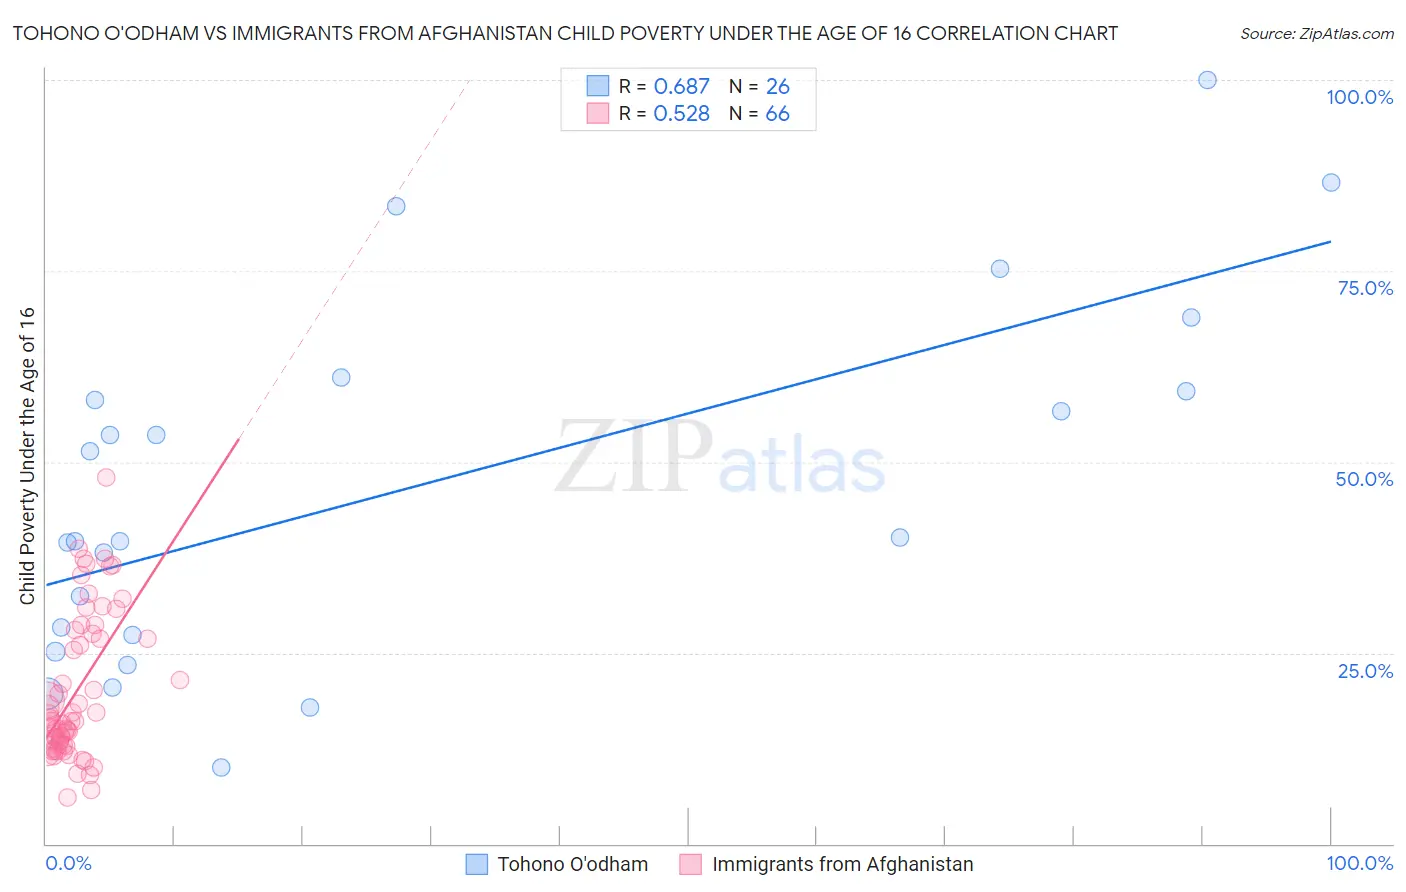 Tohono O'odham vs Immigrants from Afghanistan Child Poverty Under the Age of 16